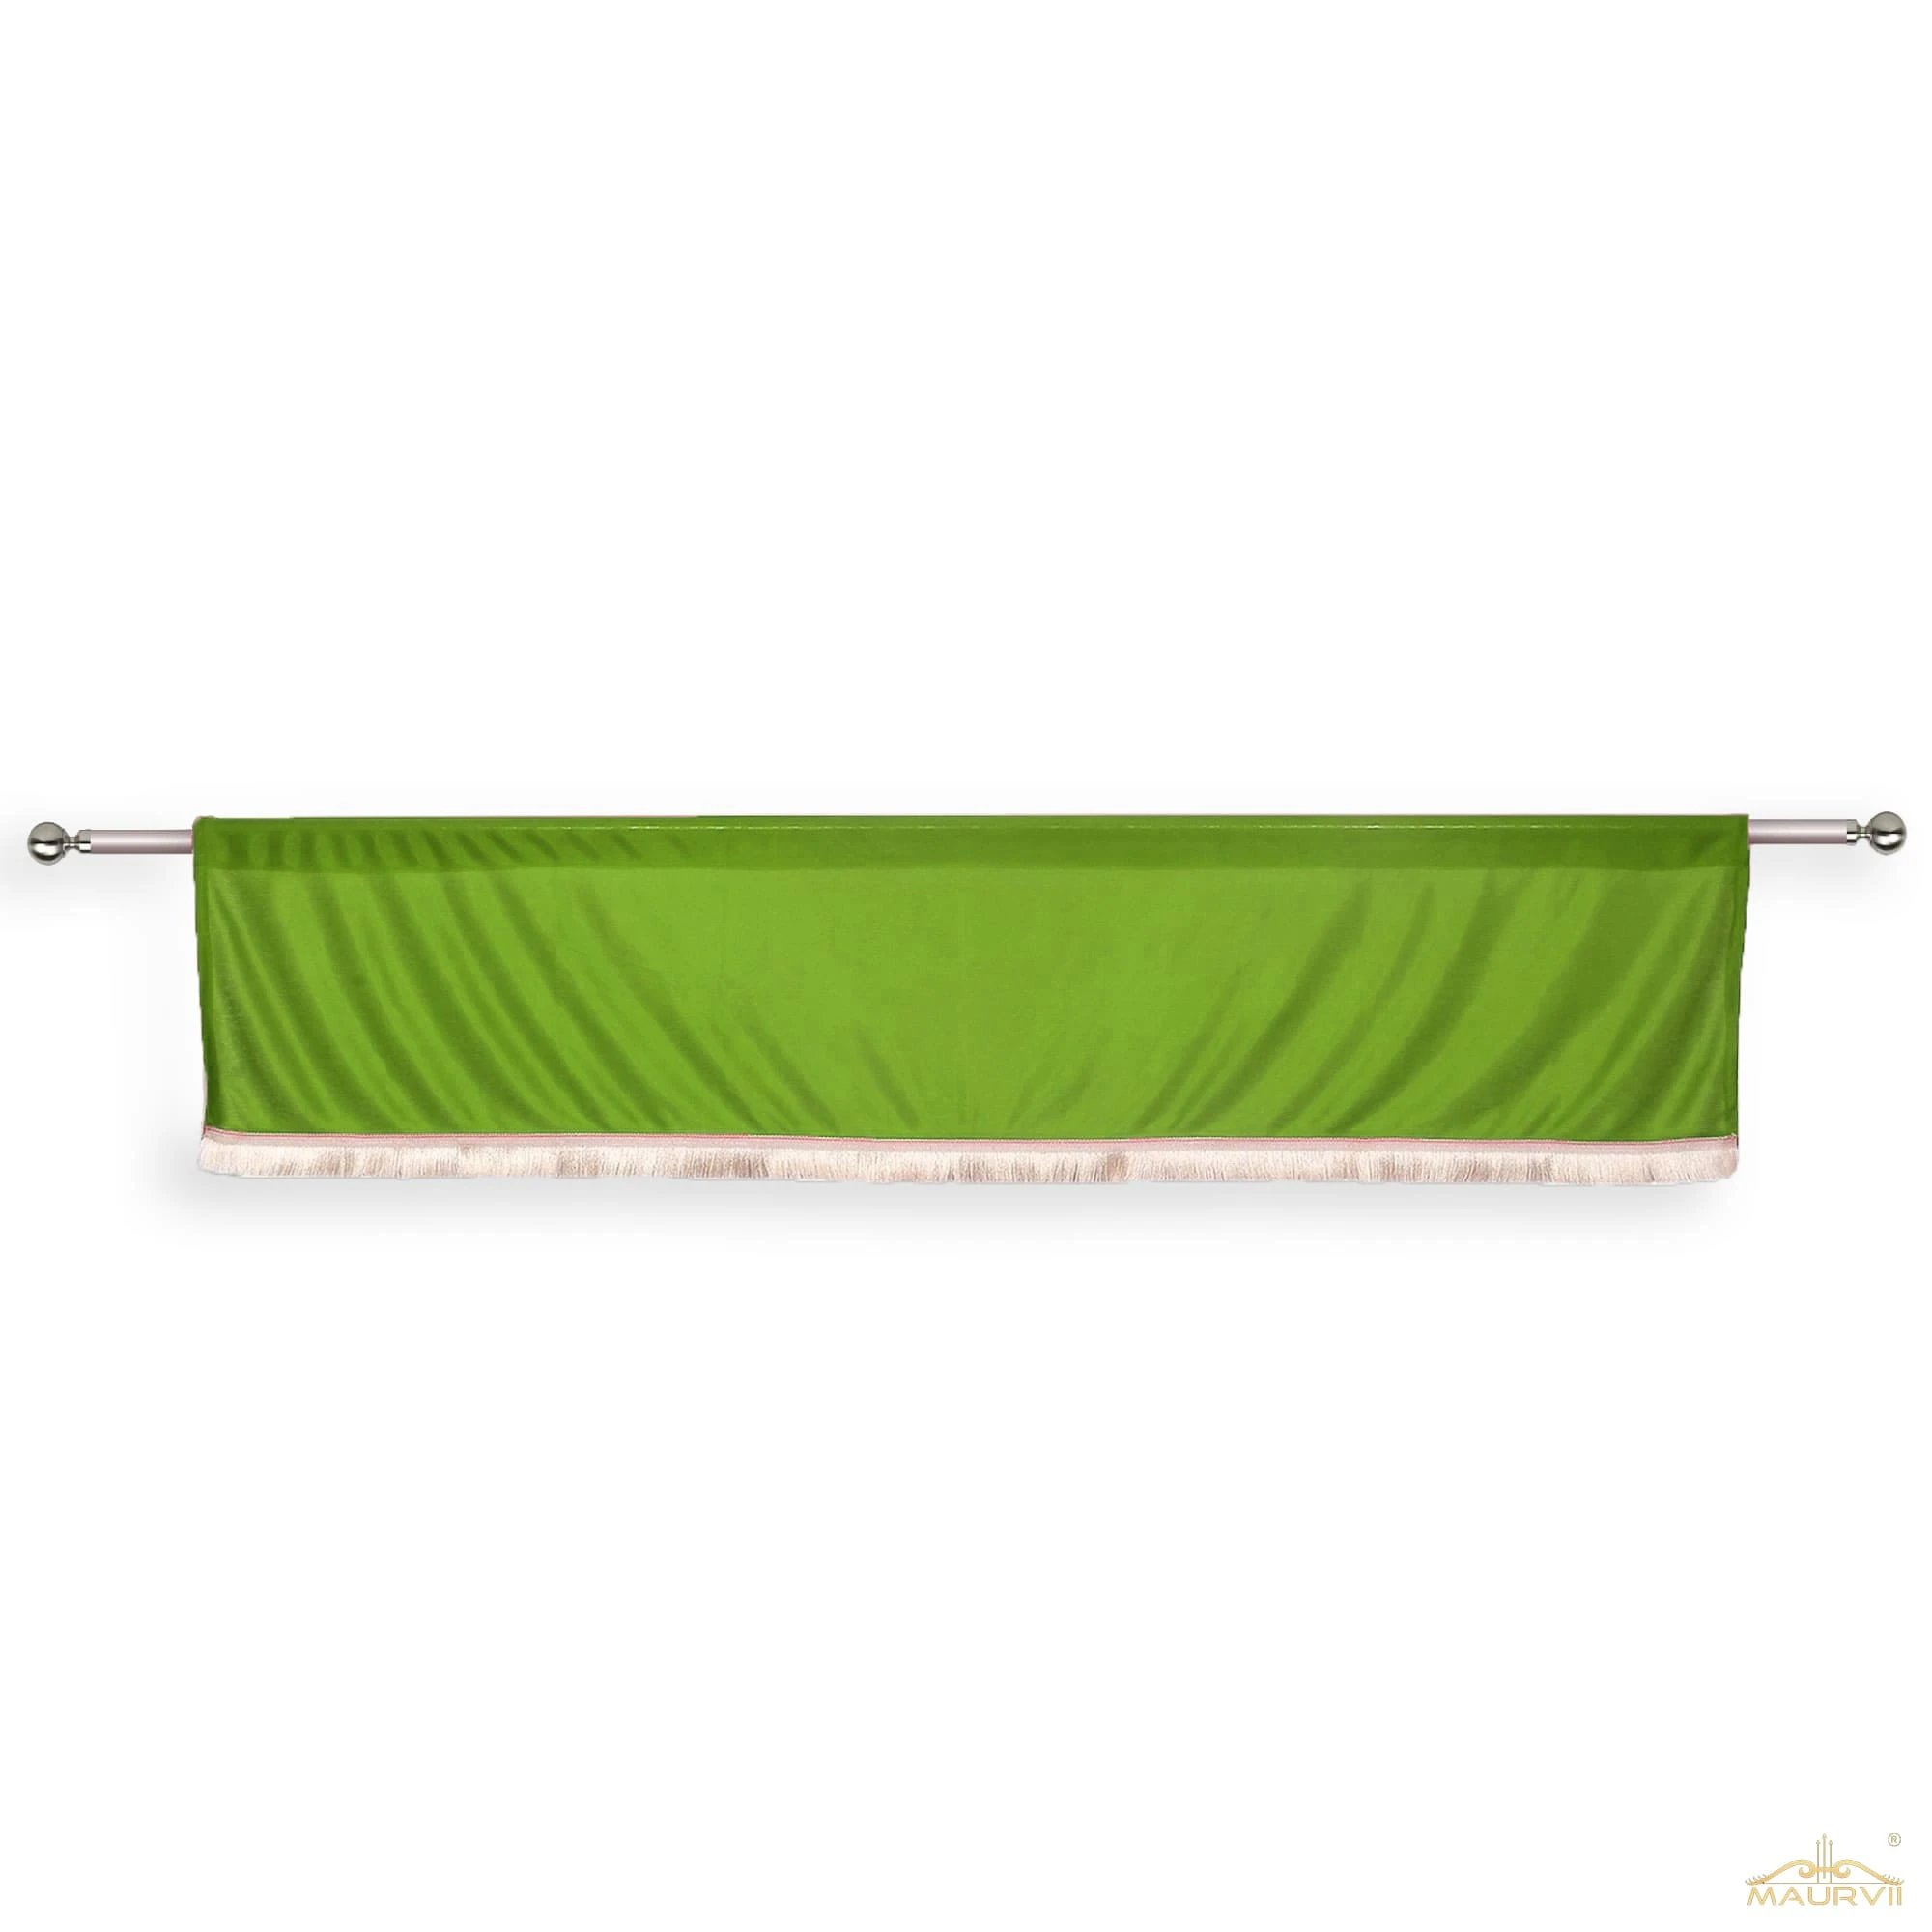 Green valance curtains with fringe